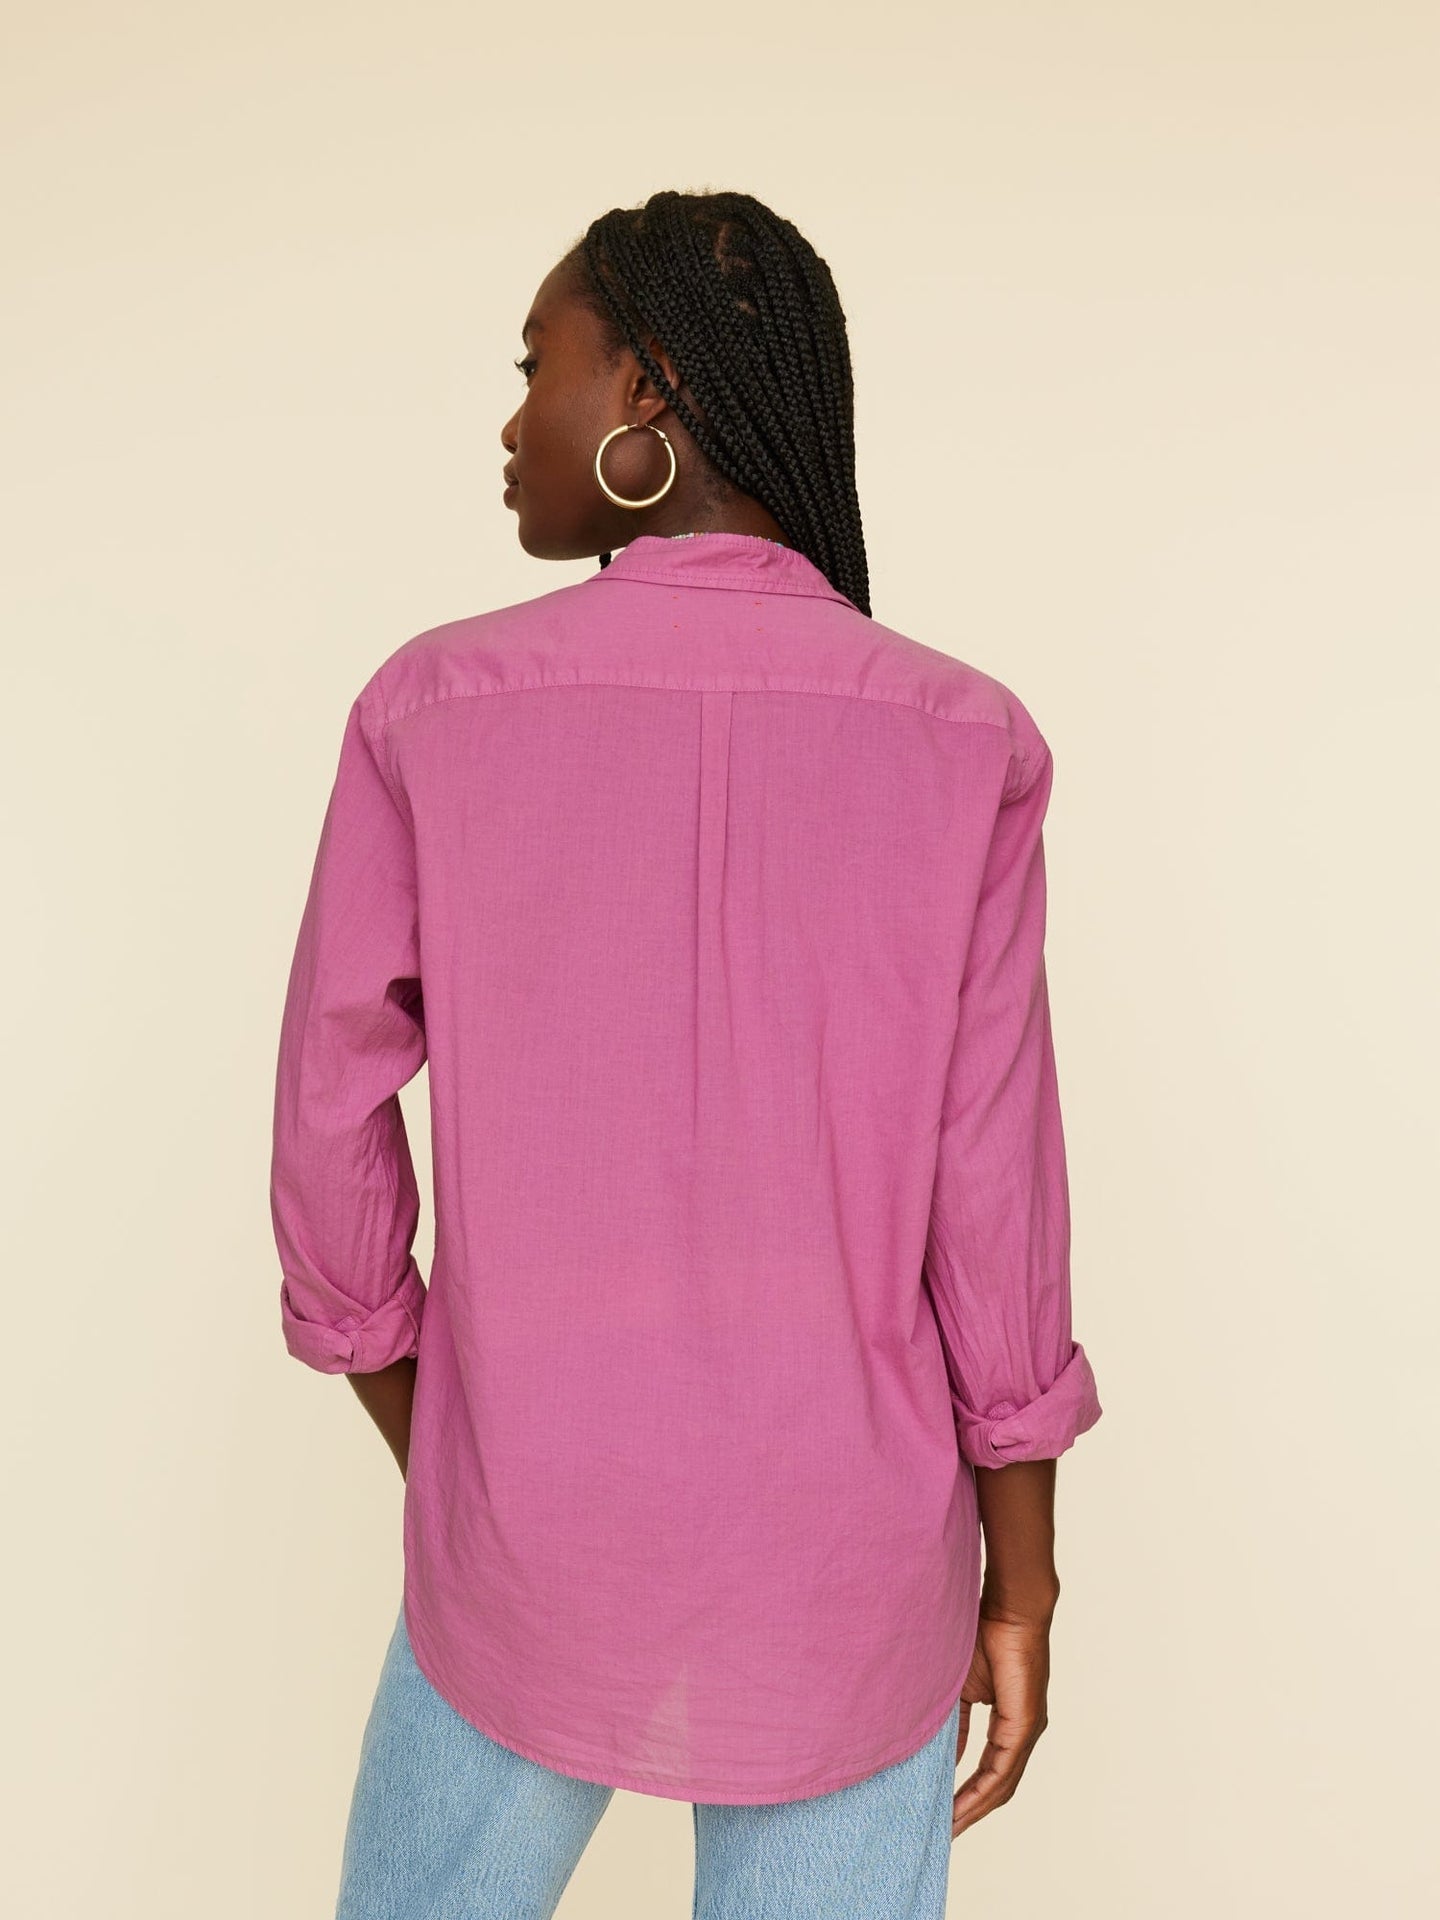 The Xirena Beau Shirt in Rose Tea available at The New Trend Australia